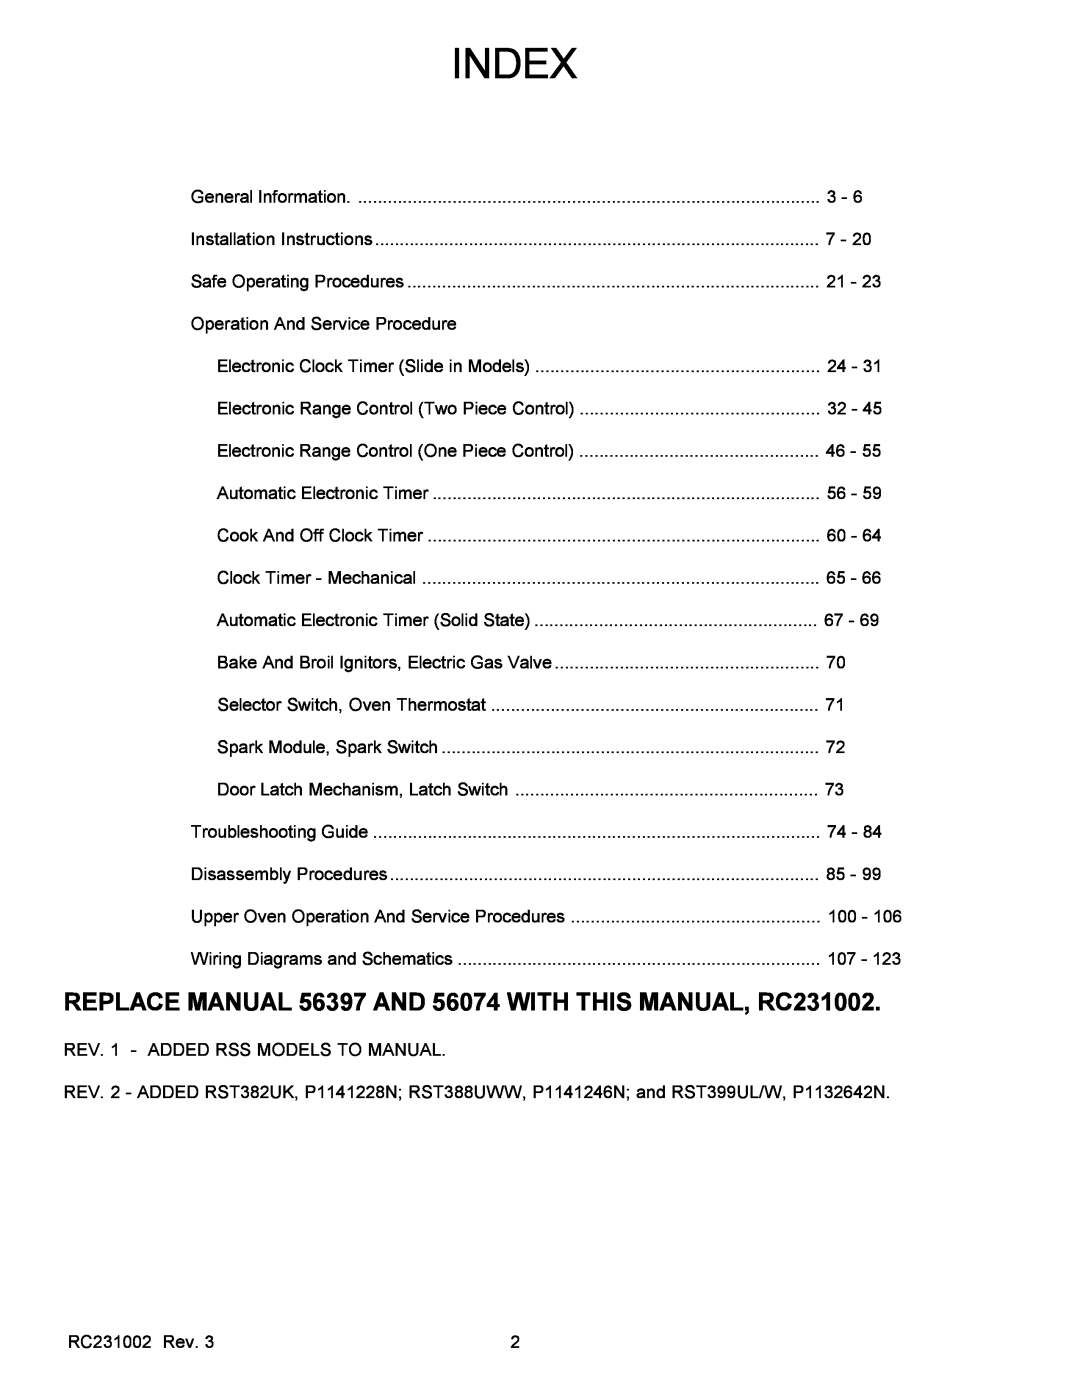 Amana RSS, RST service manual Index, REPLACE MANUAL 56397 AND 56074 WITH THIS MANUAL, RC231002 